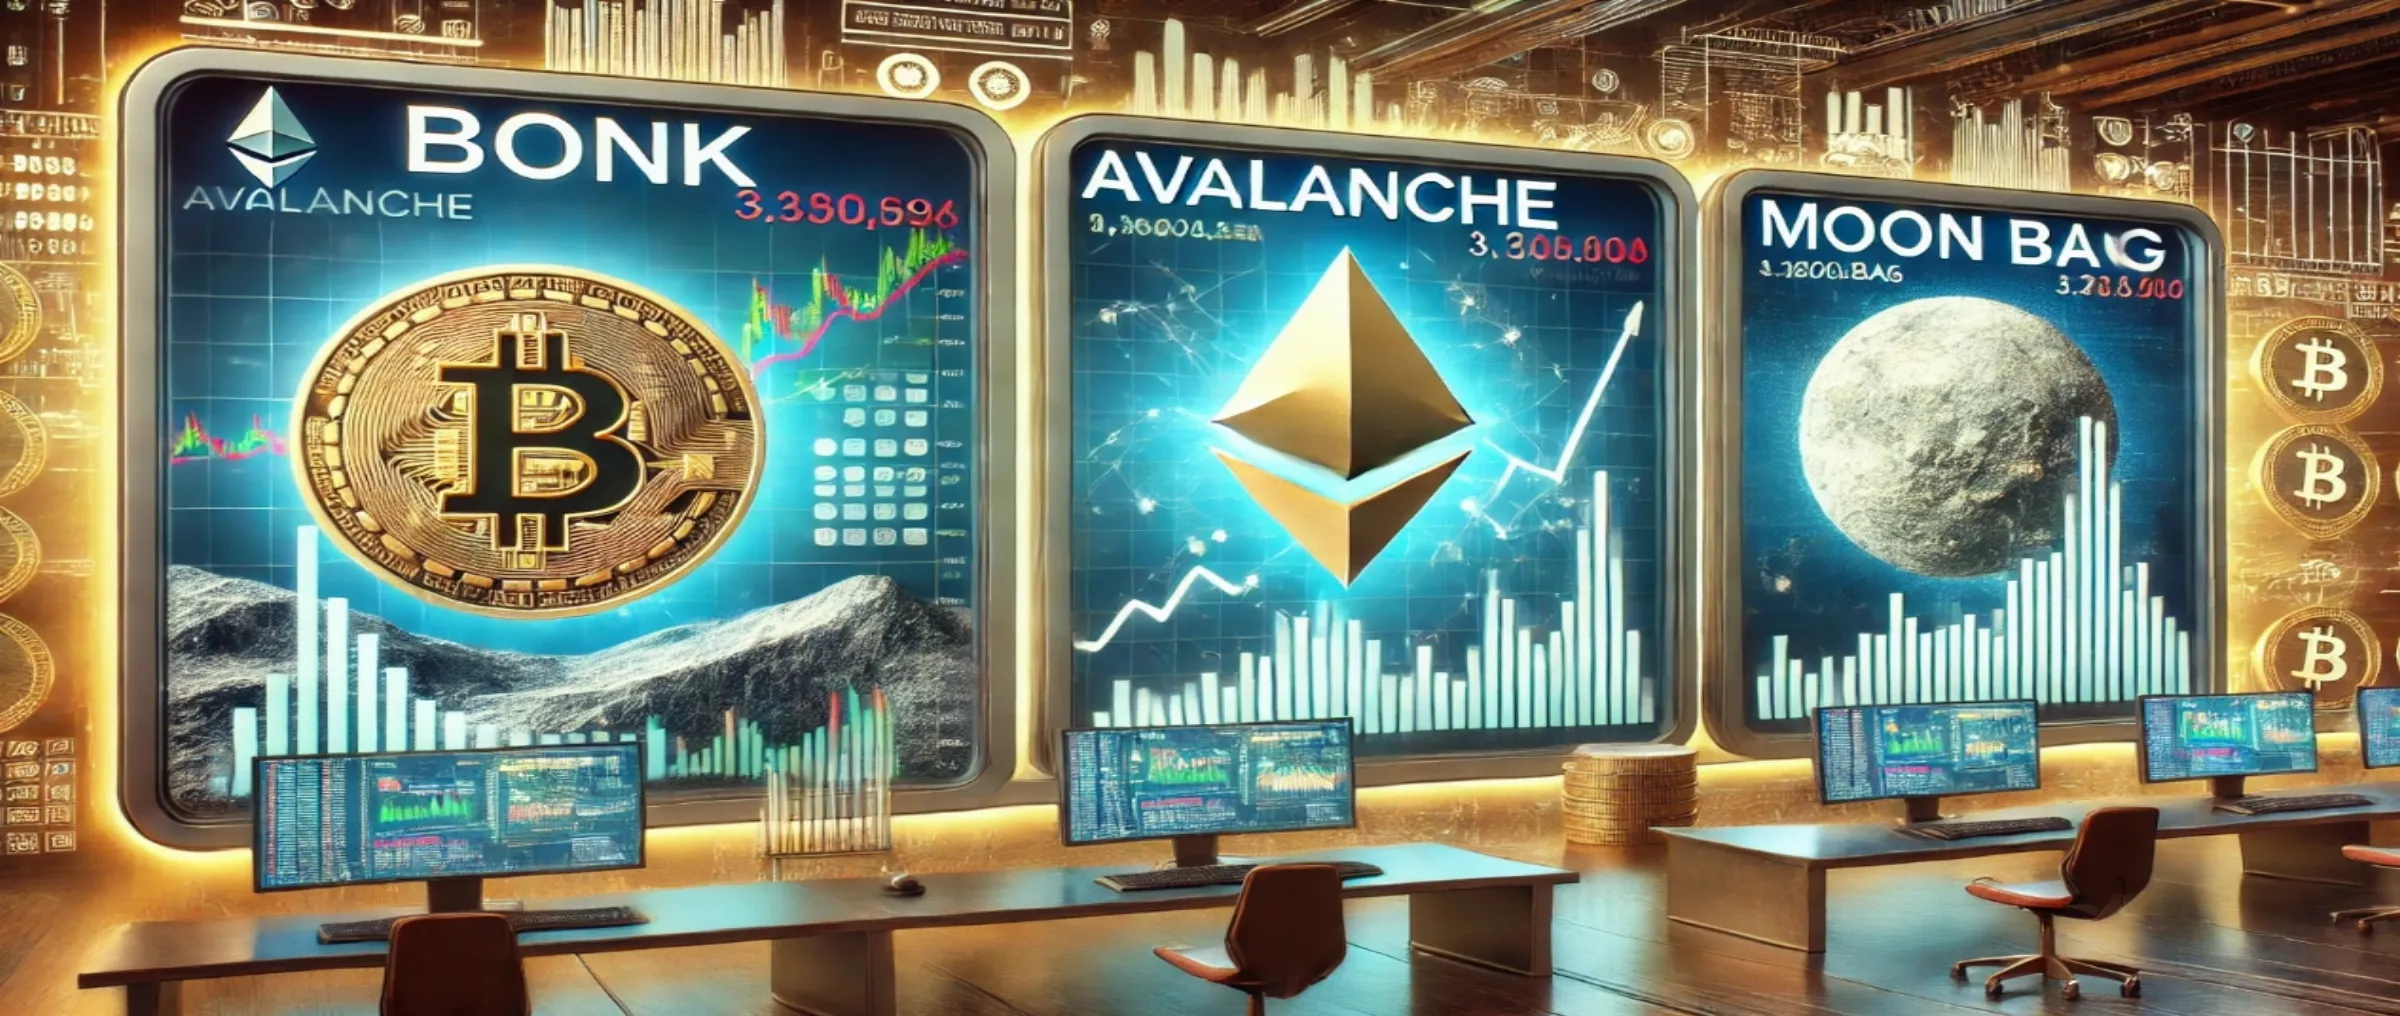 Cryptocurrency Trends: Bonk, Avalanche, and MoonBag